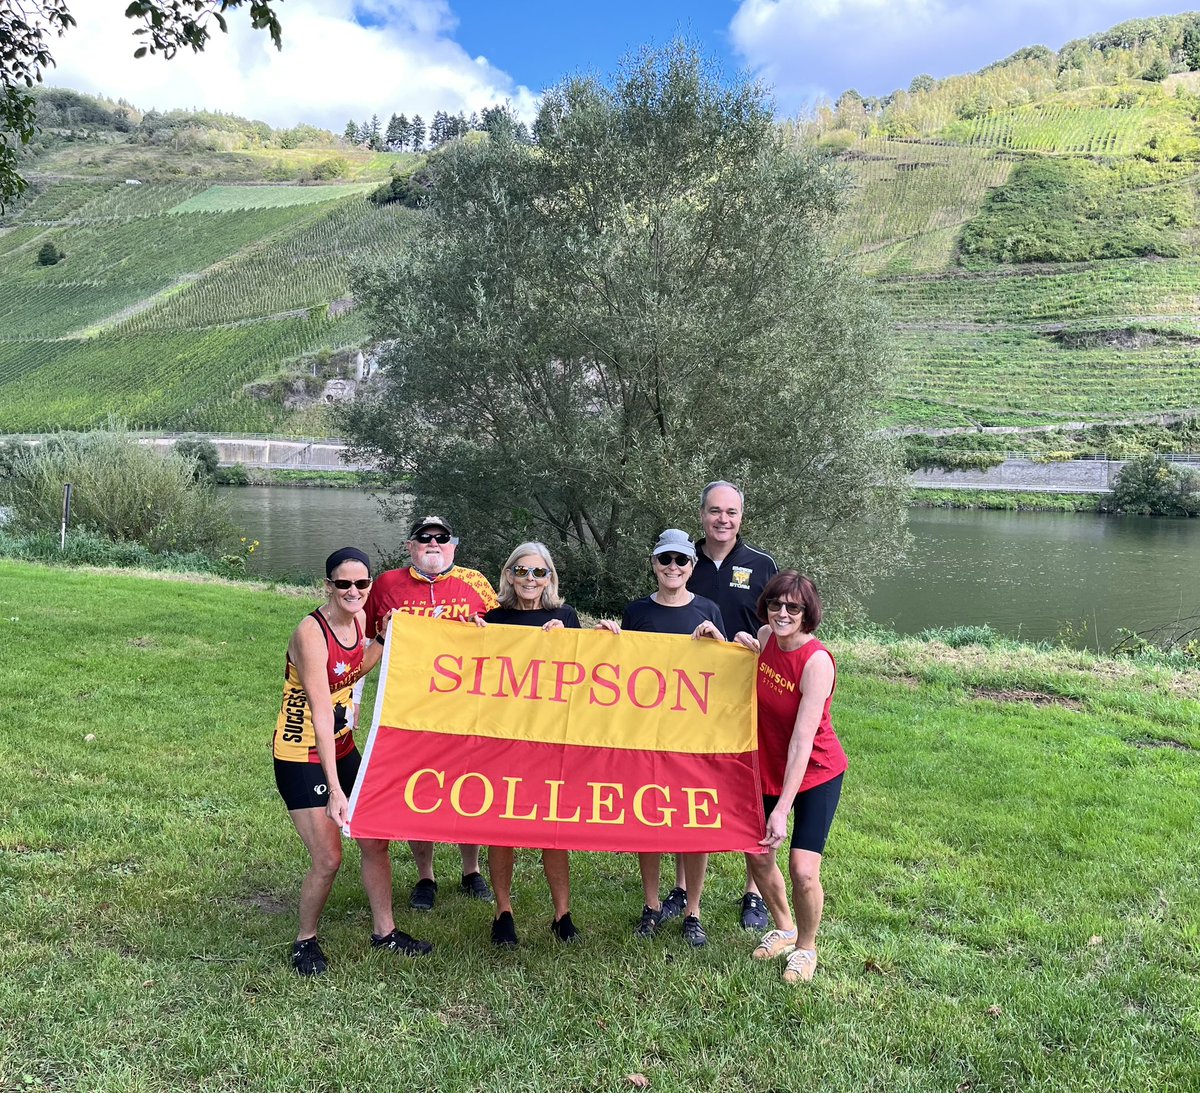 Riding the Mosel River Valley with some great SC alumni - what a wonderful way to explore Germany!#taketheworldbySTORM, #rollSTORM